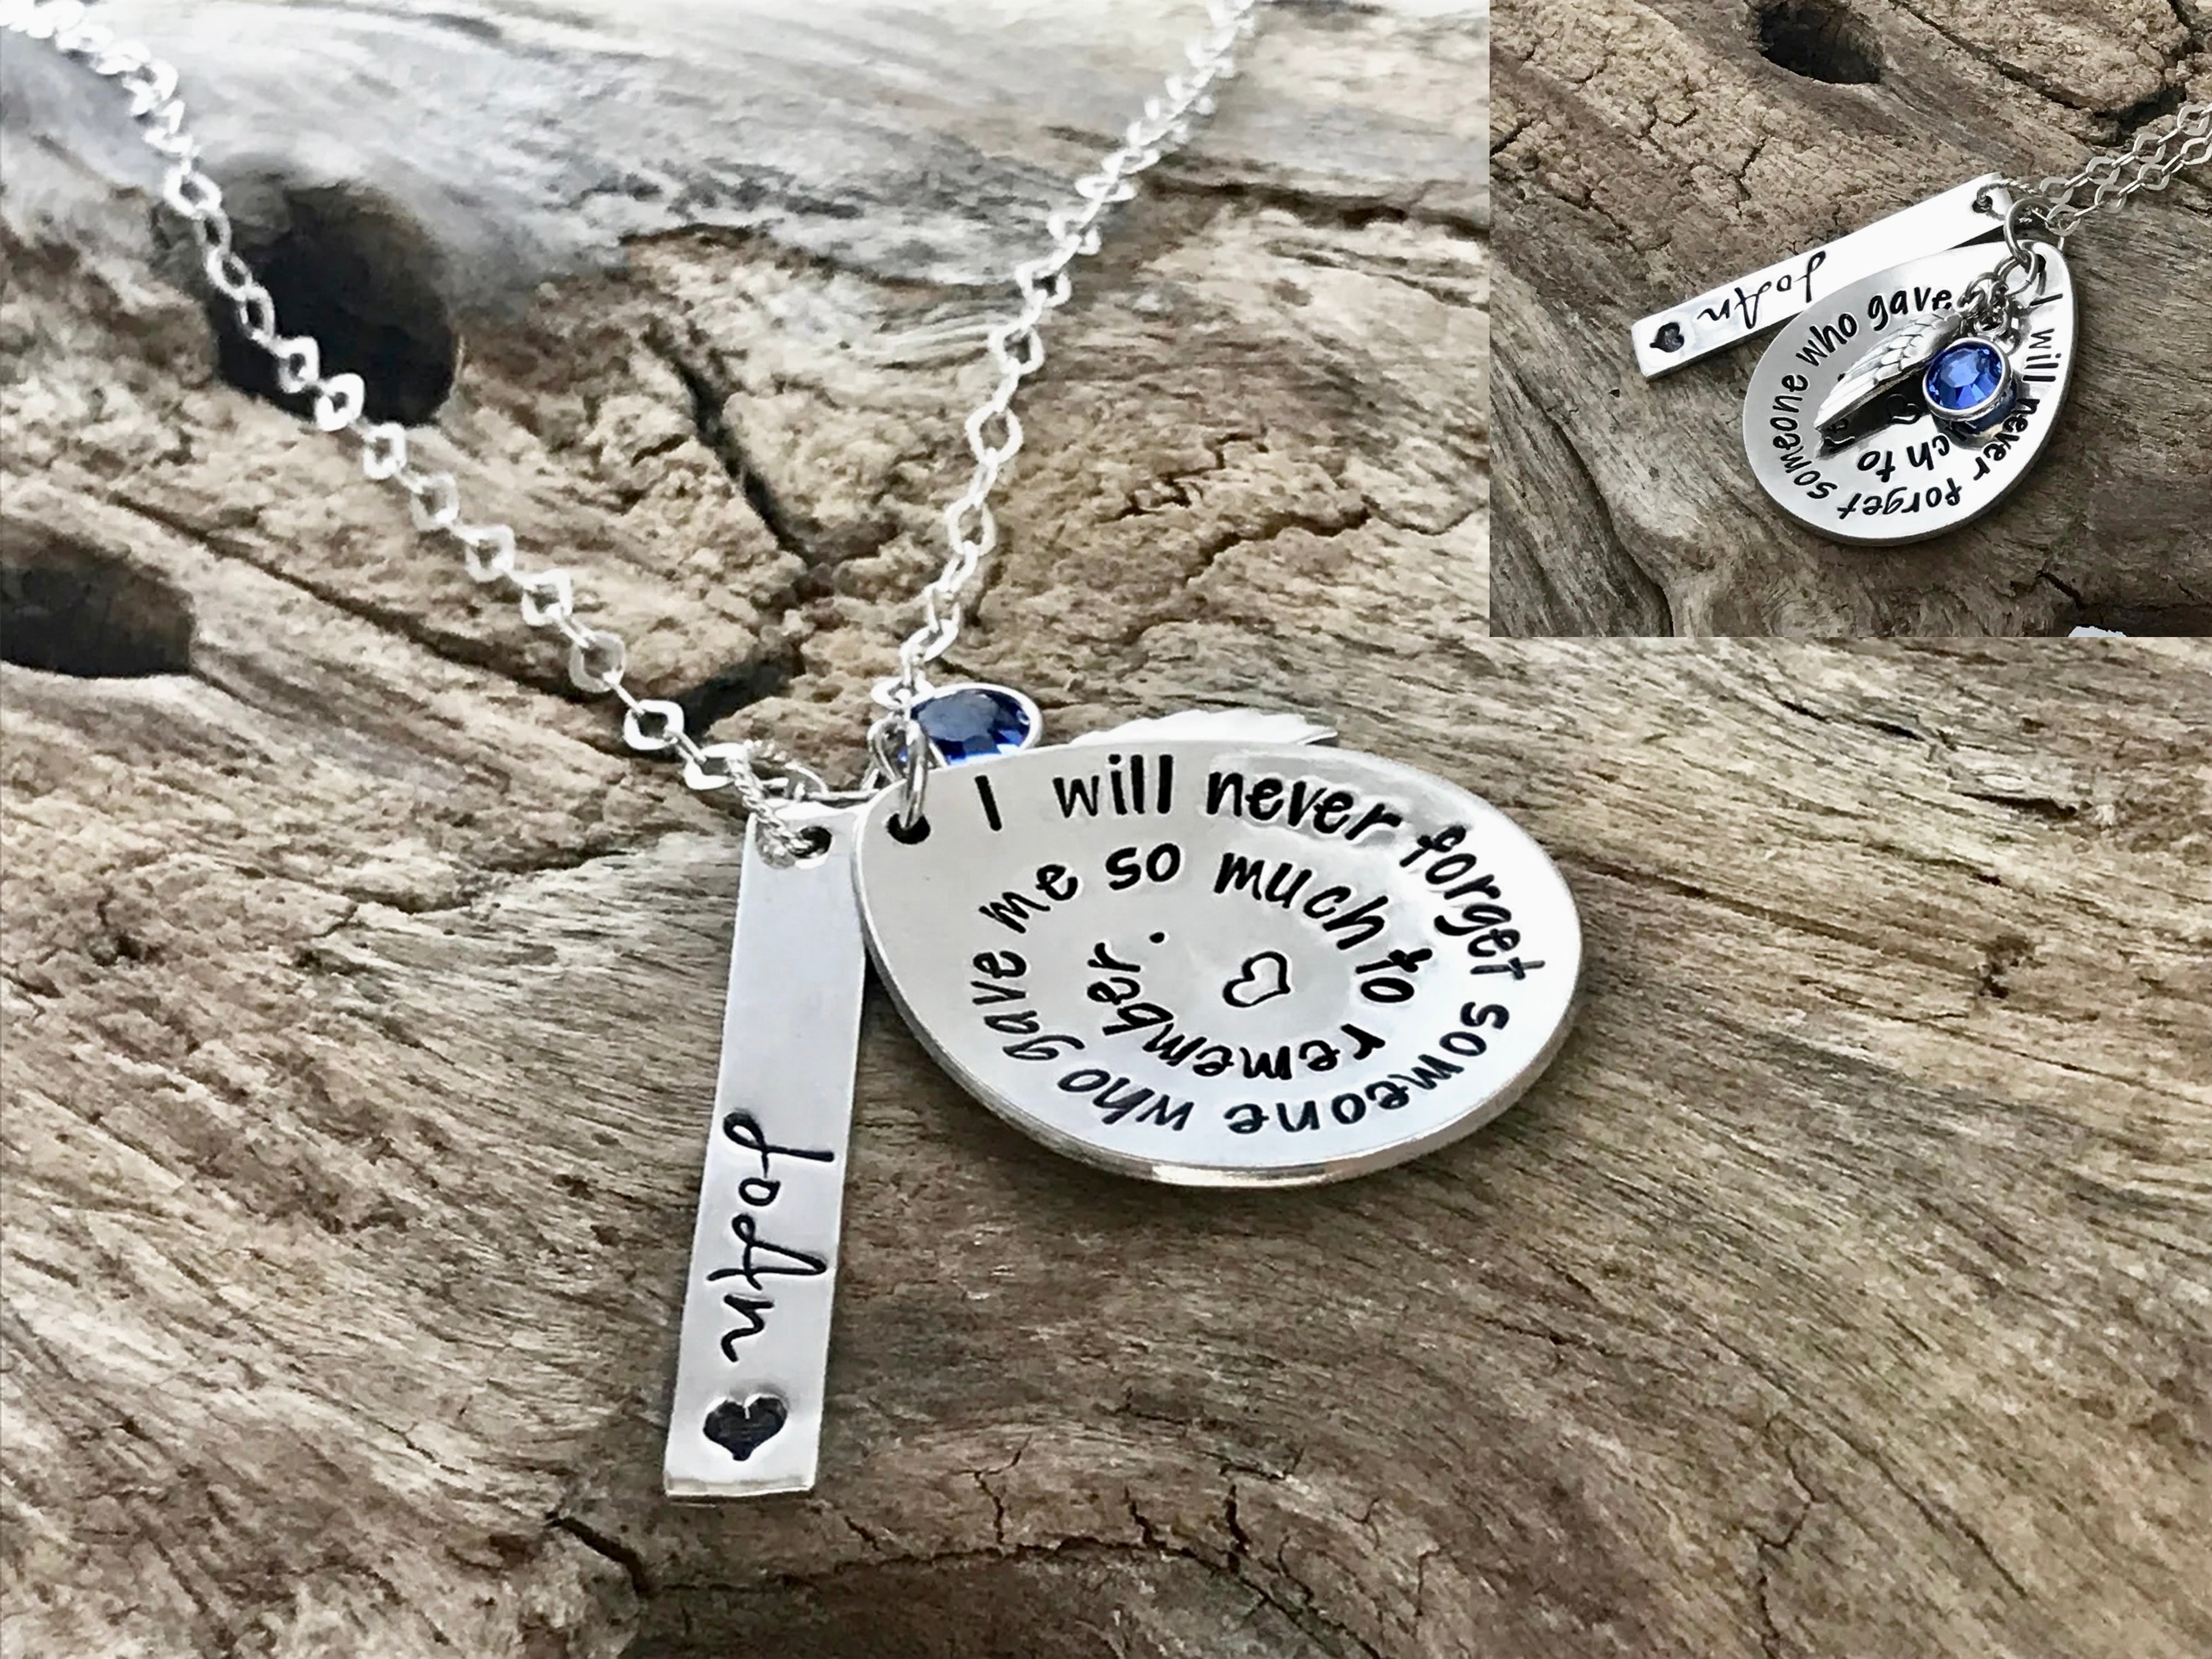 Amazon.com: Dad Memorial Necklace I Used To Be His Angel Jewelry Sympathy  Keepsake Womens Chain 24